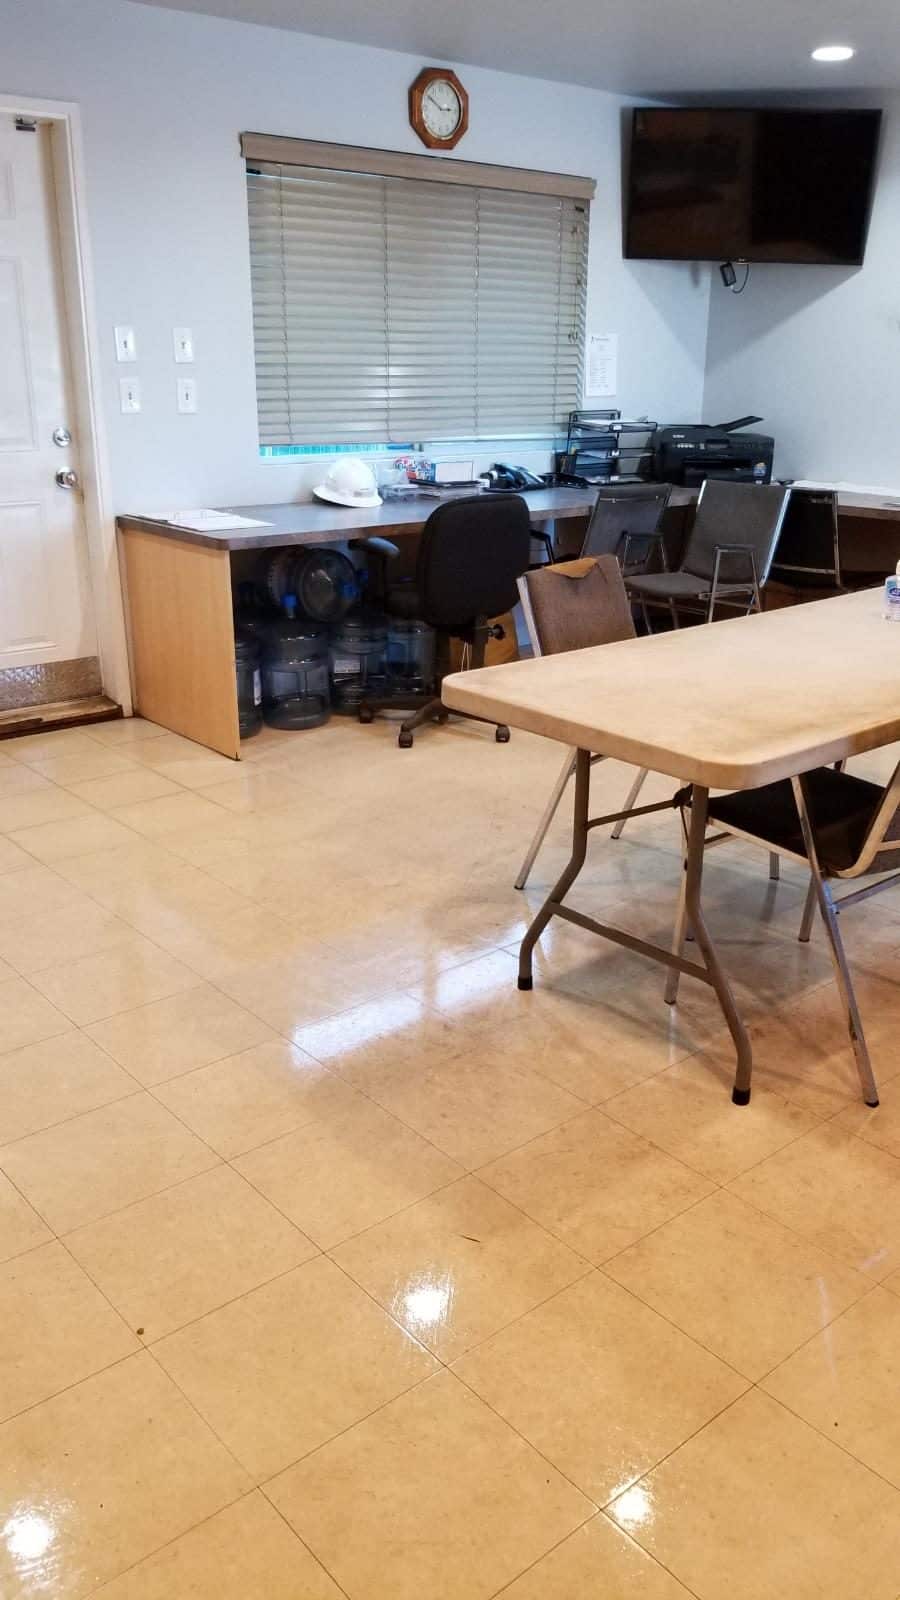 Office Lunch Room Cleaning